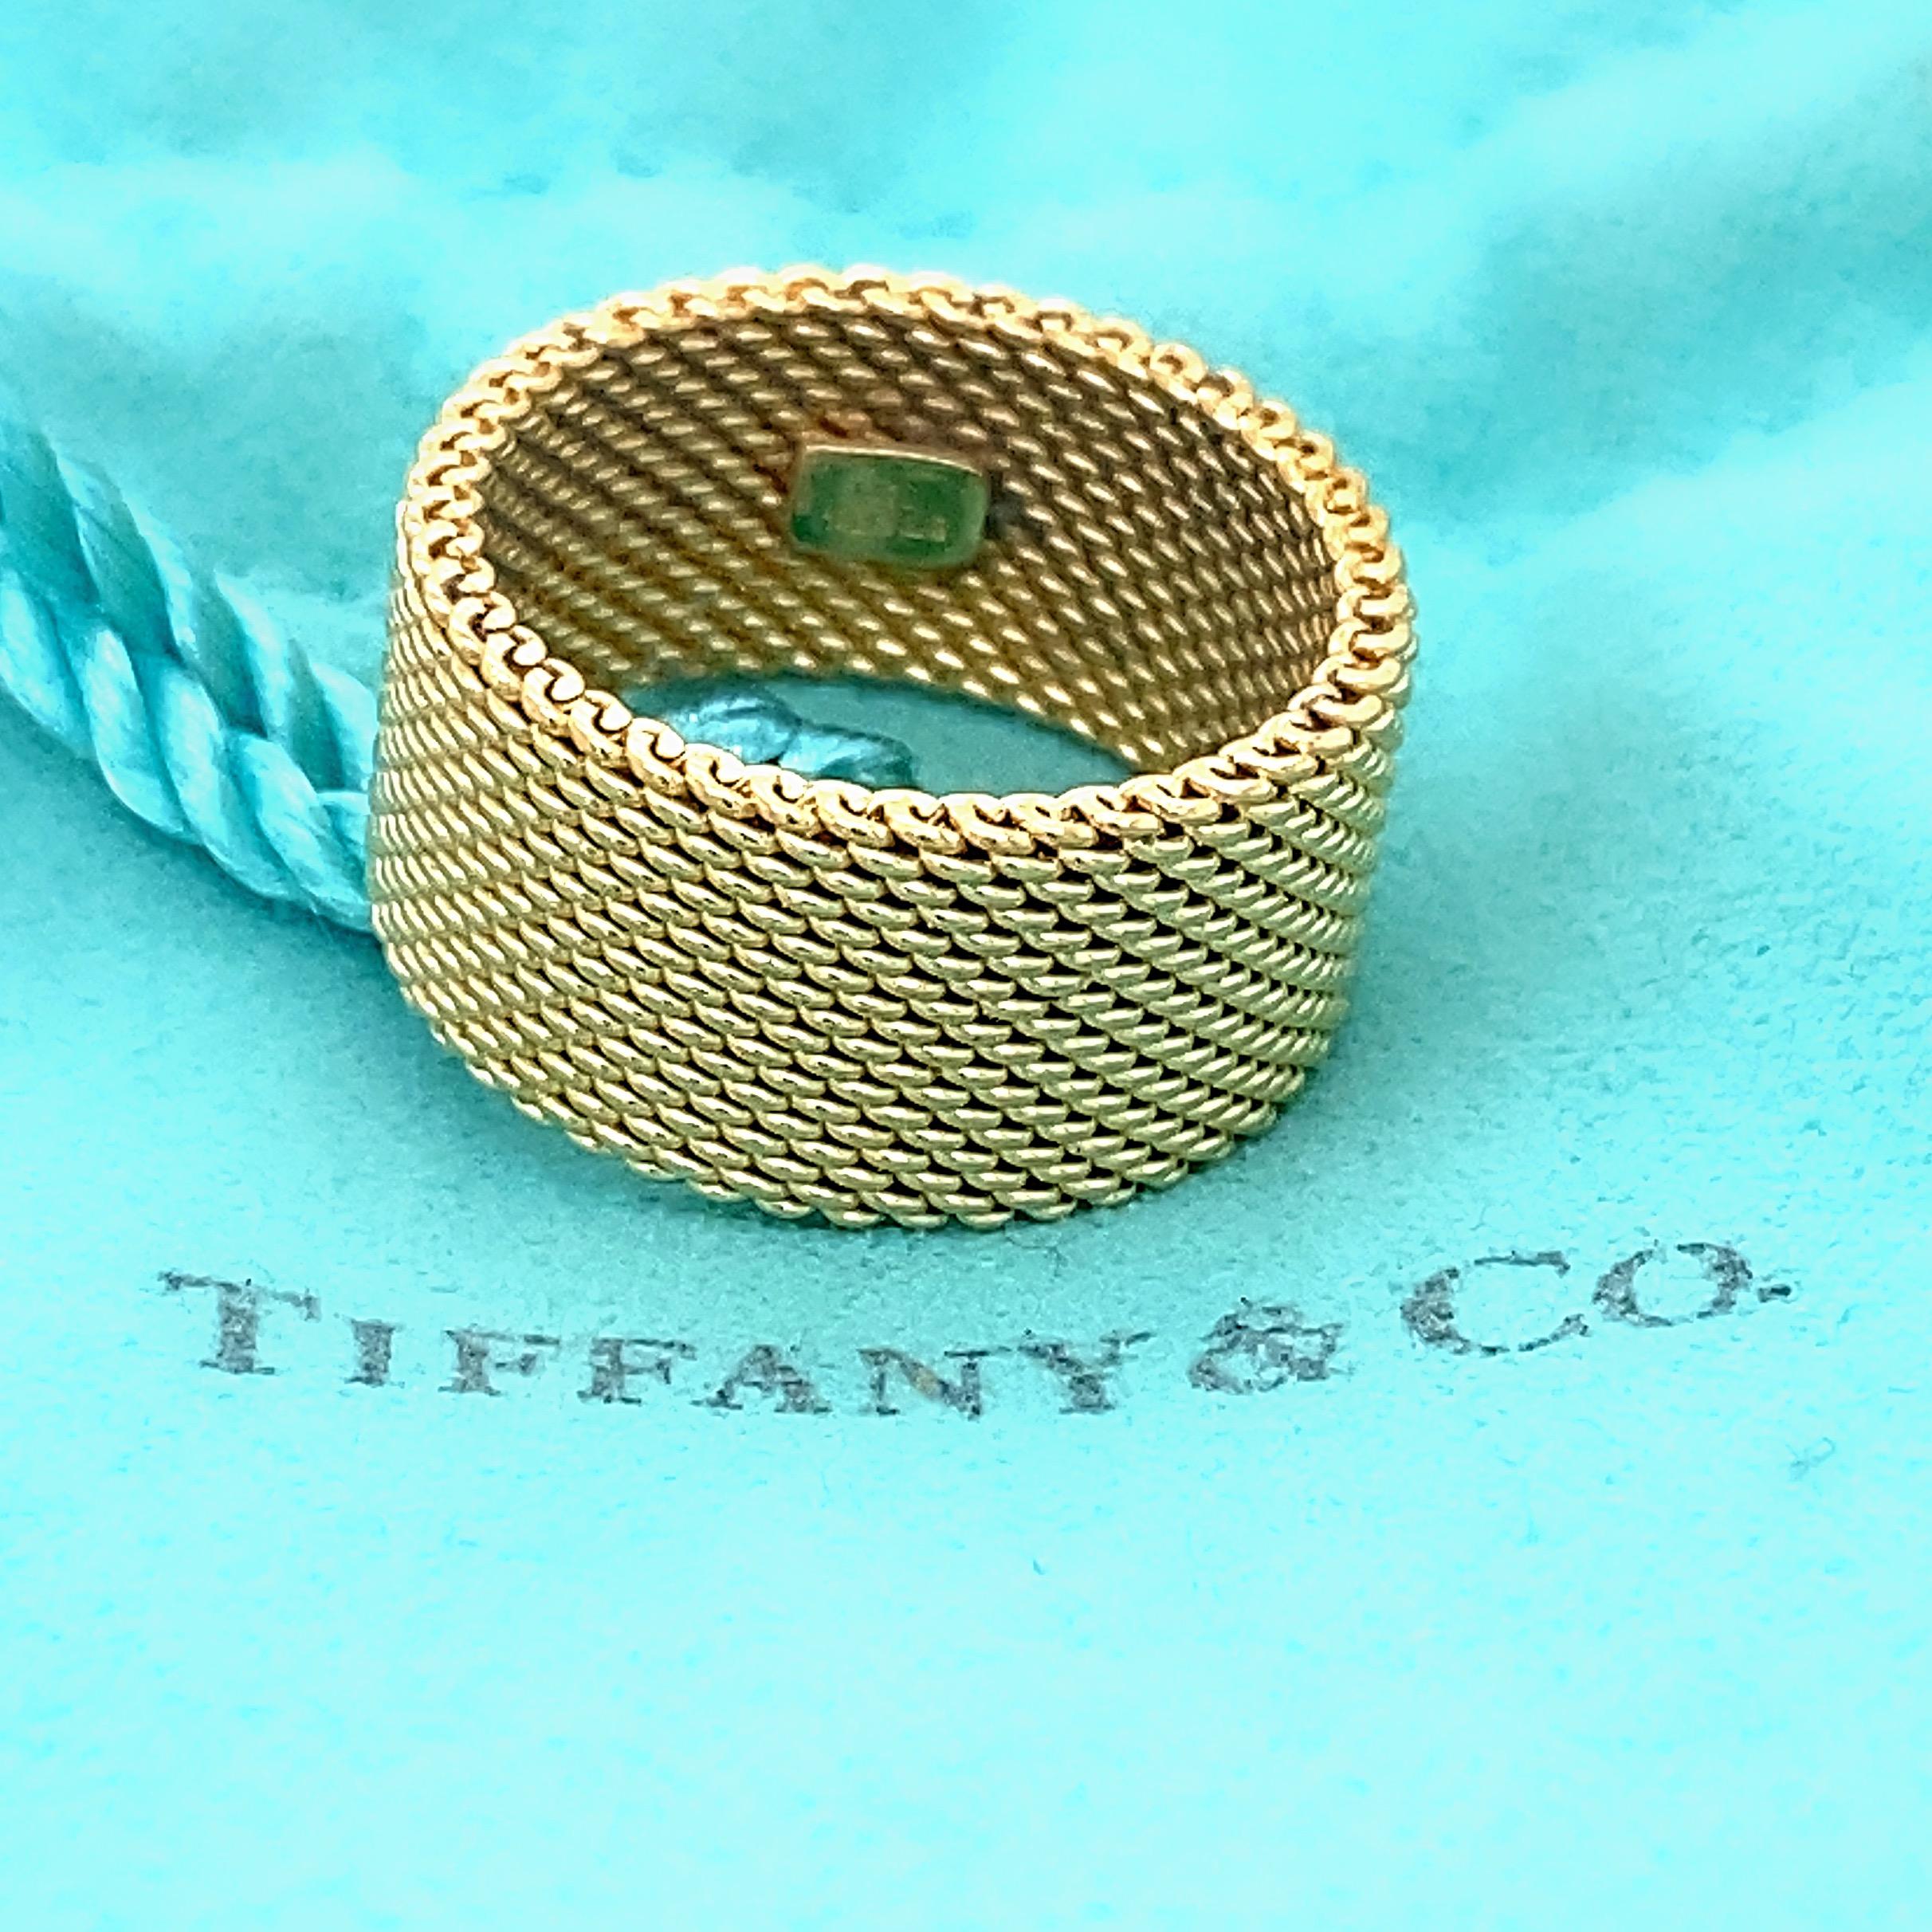 Tiffany & Co. Somerset Mesh Wide Band Ring
Style:  Band
Metal:  18kt Yellow Gold
Size:  5.75 
Width:  10 MM
Hallmark:  ©T&Co. 750
Includes:  T&C Ring Pouch
Retail:  $2,800

Sku#11980TJD032521-5.75